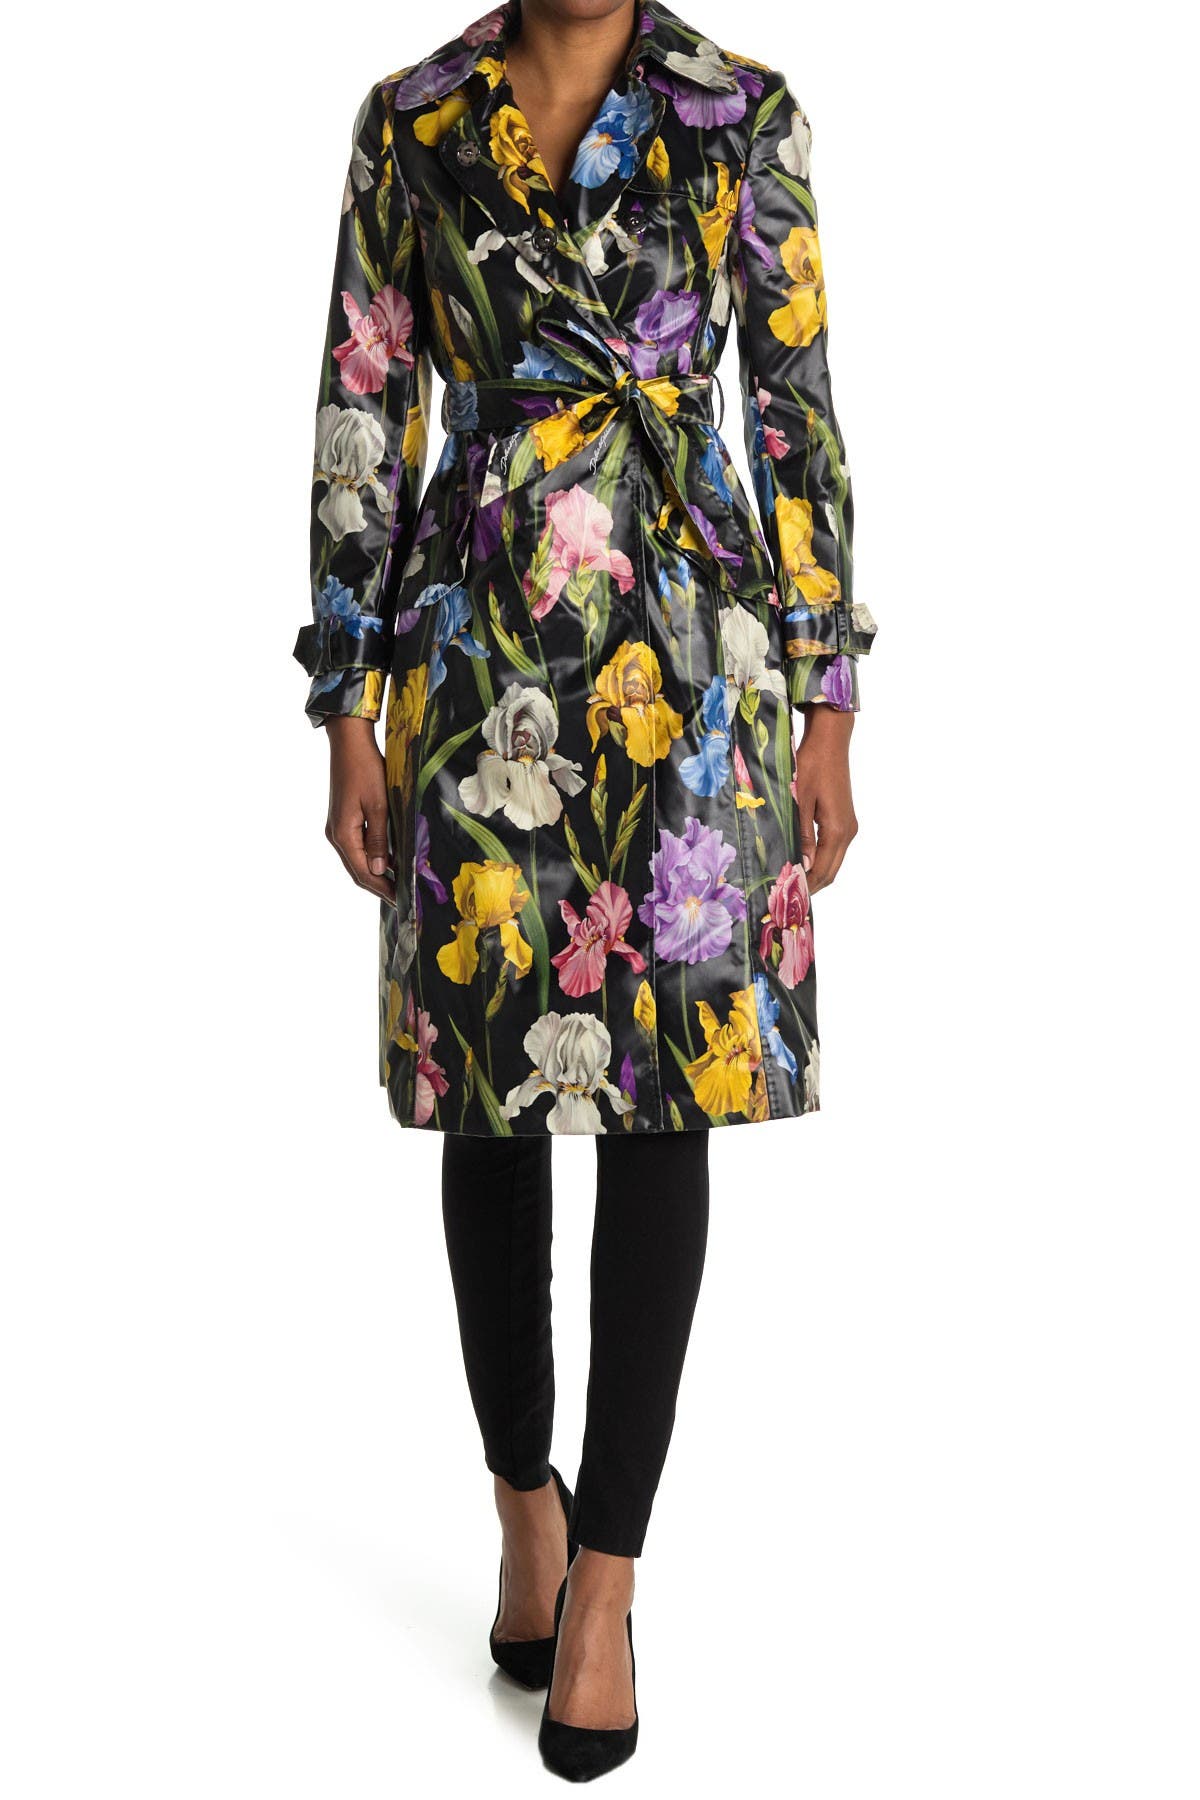 dolce and gabbana floral coat